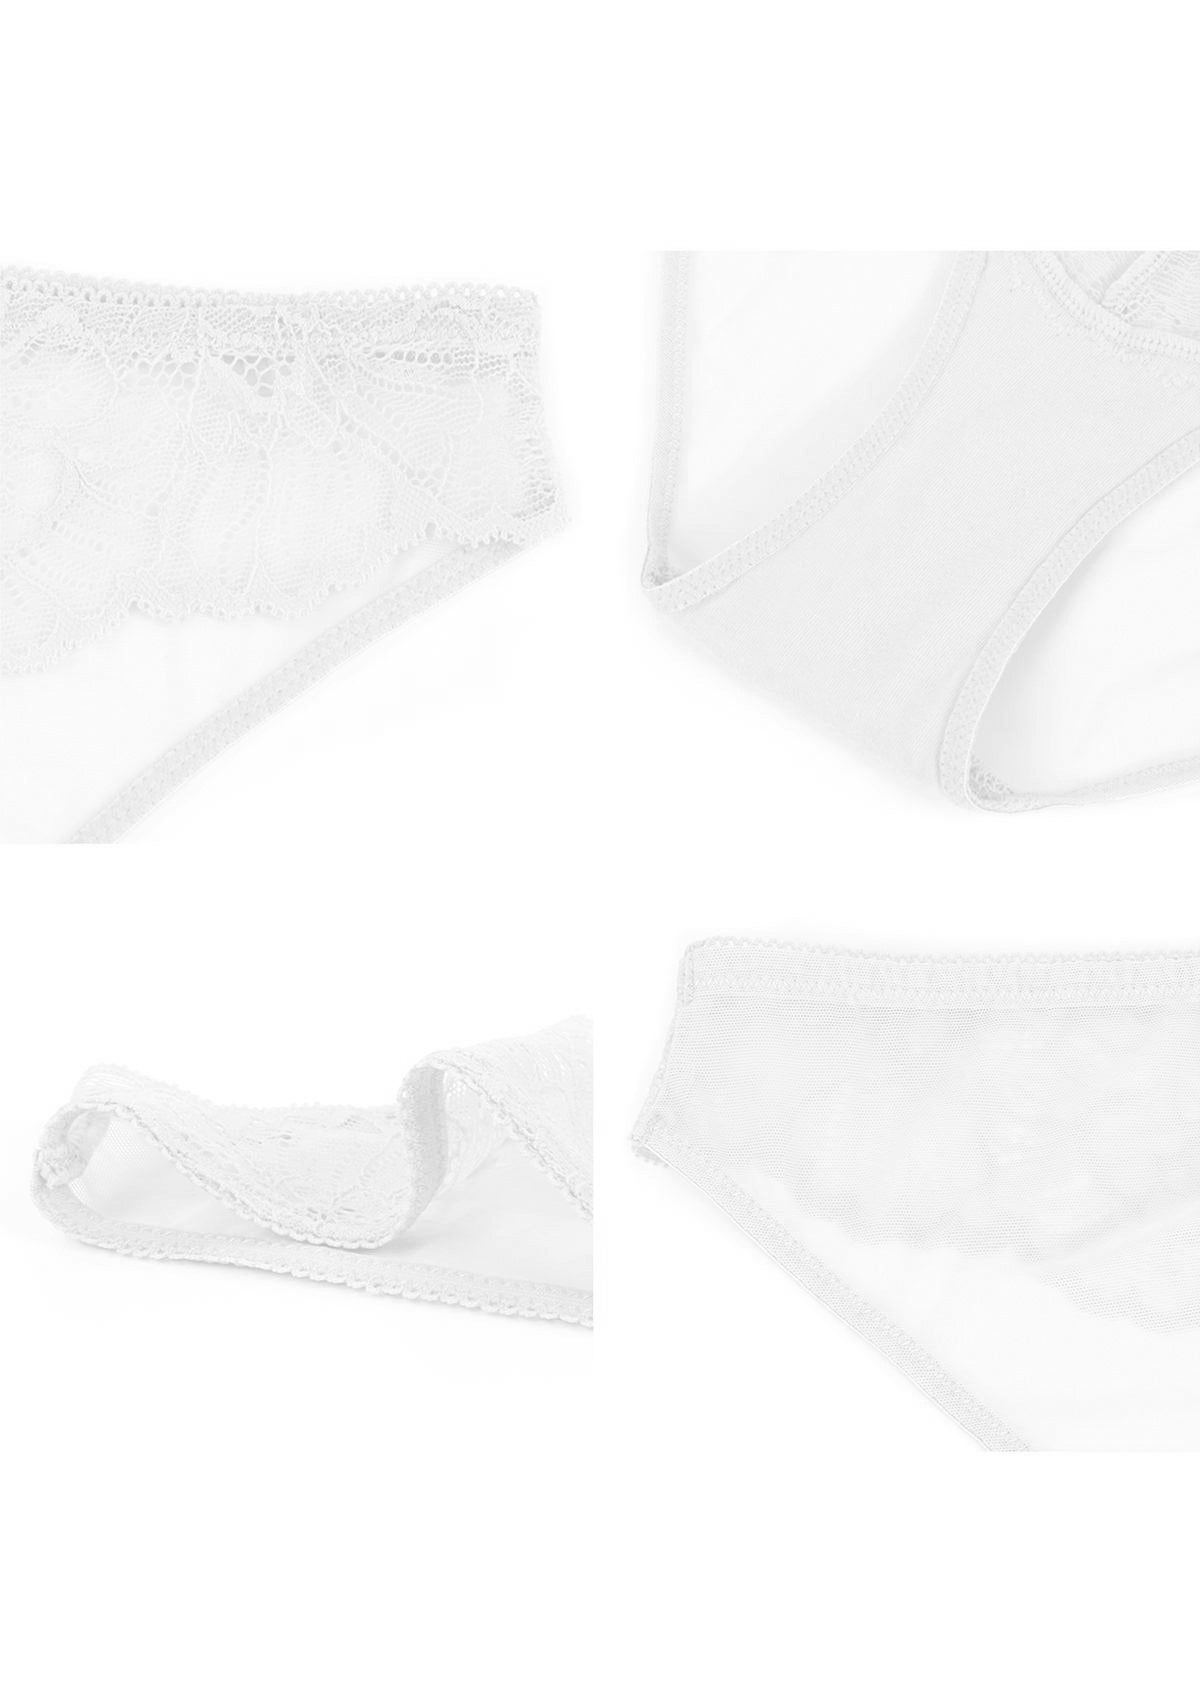 HSIA Blossom Mid-Rise Mesh Lace Panties - L / White / High-Rise Brief